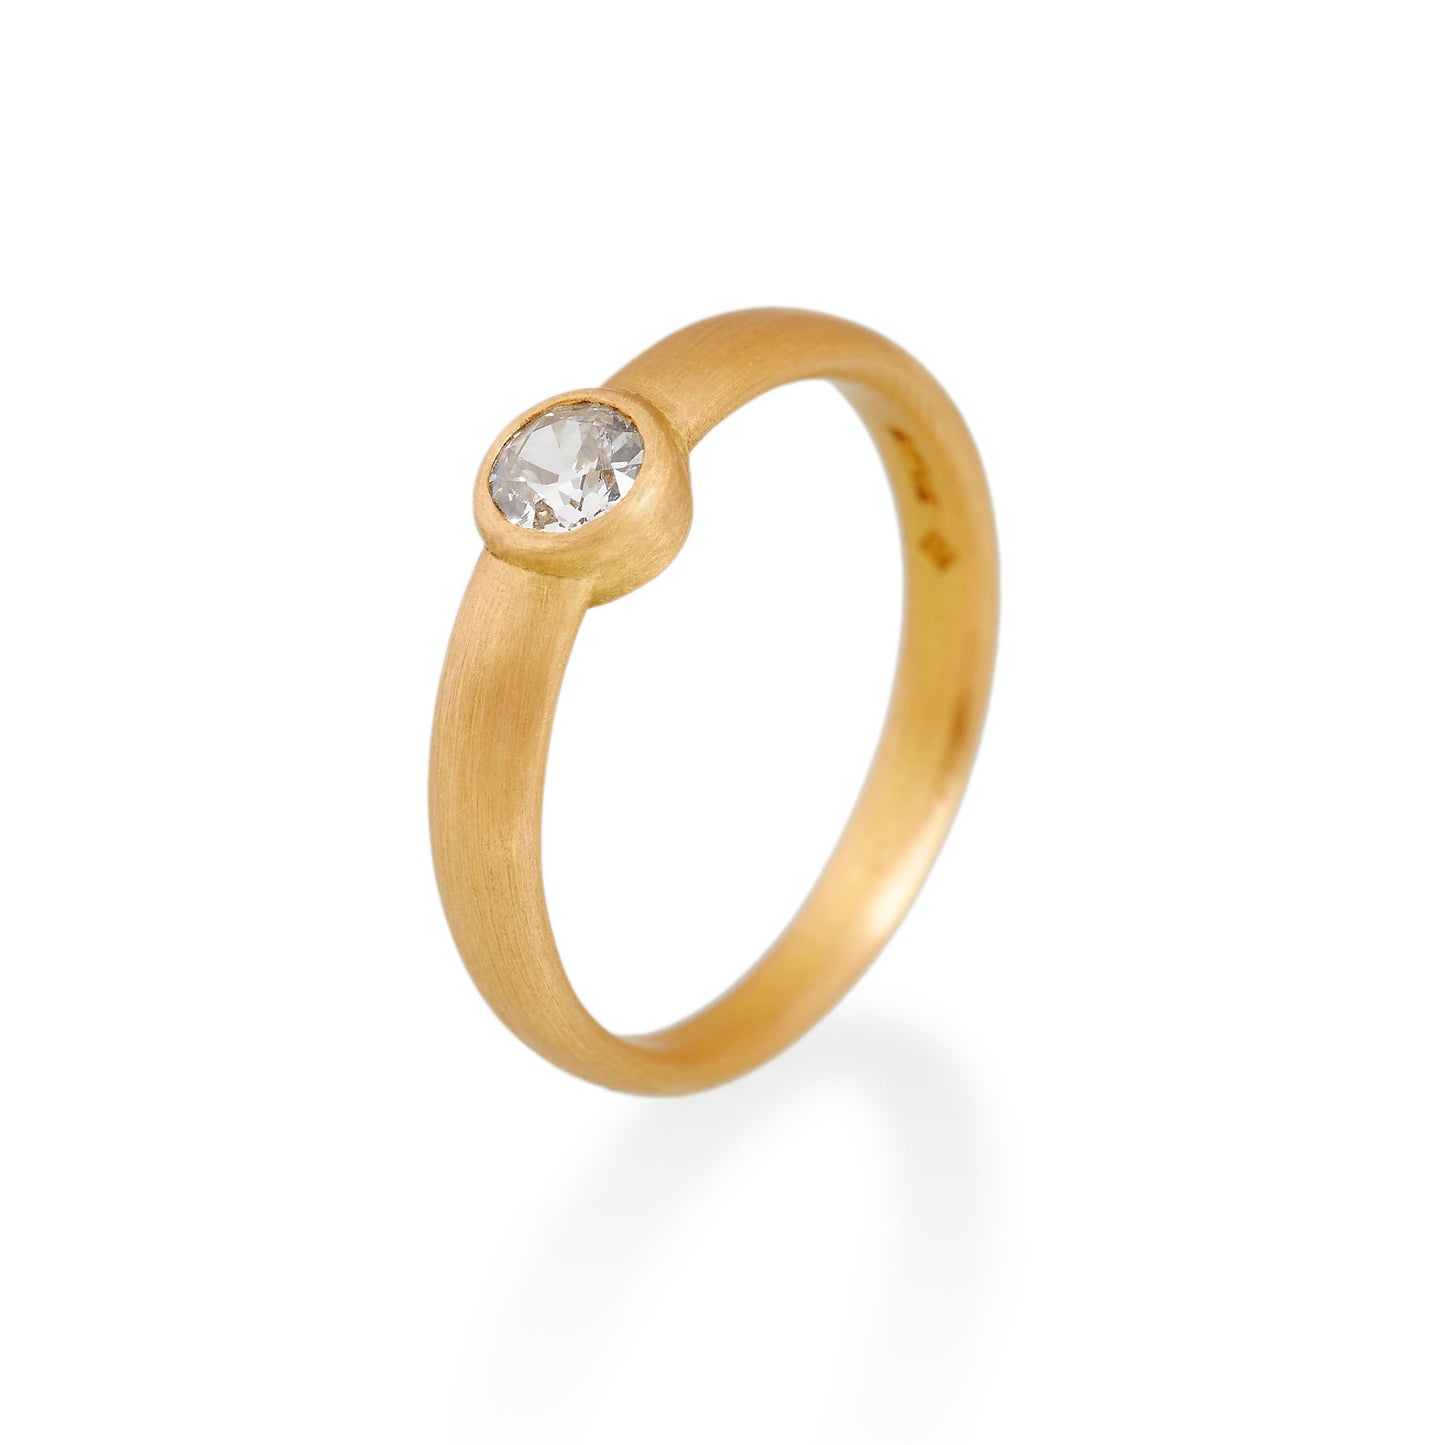 Antique Round Cut Diamond Tapered Ring, 22ct Gold